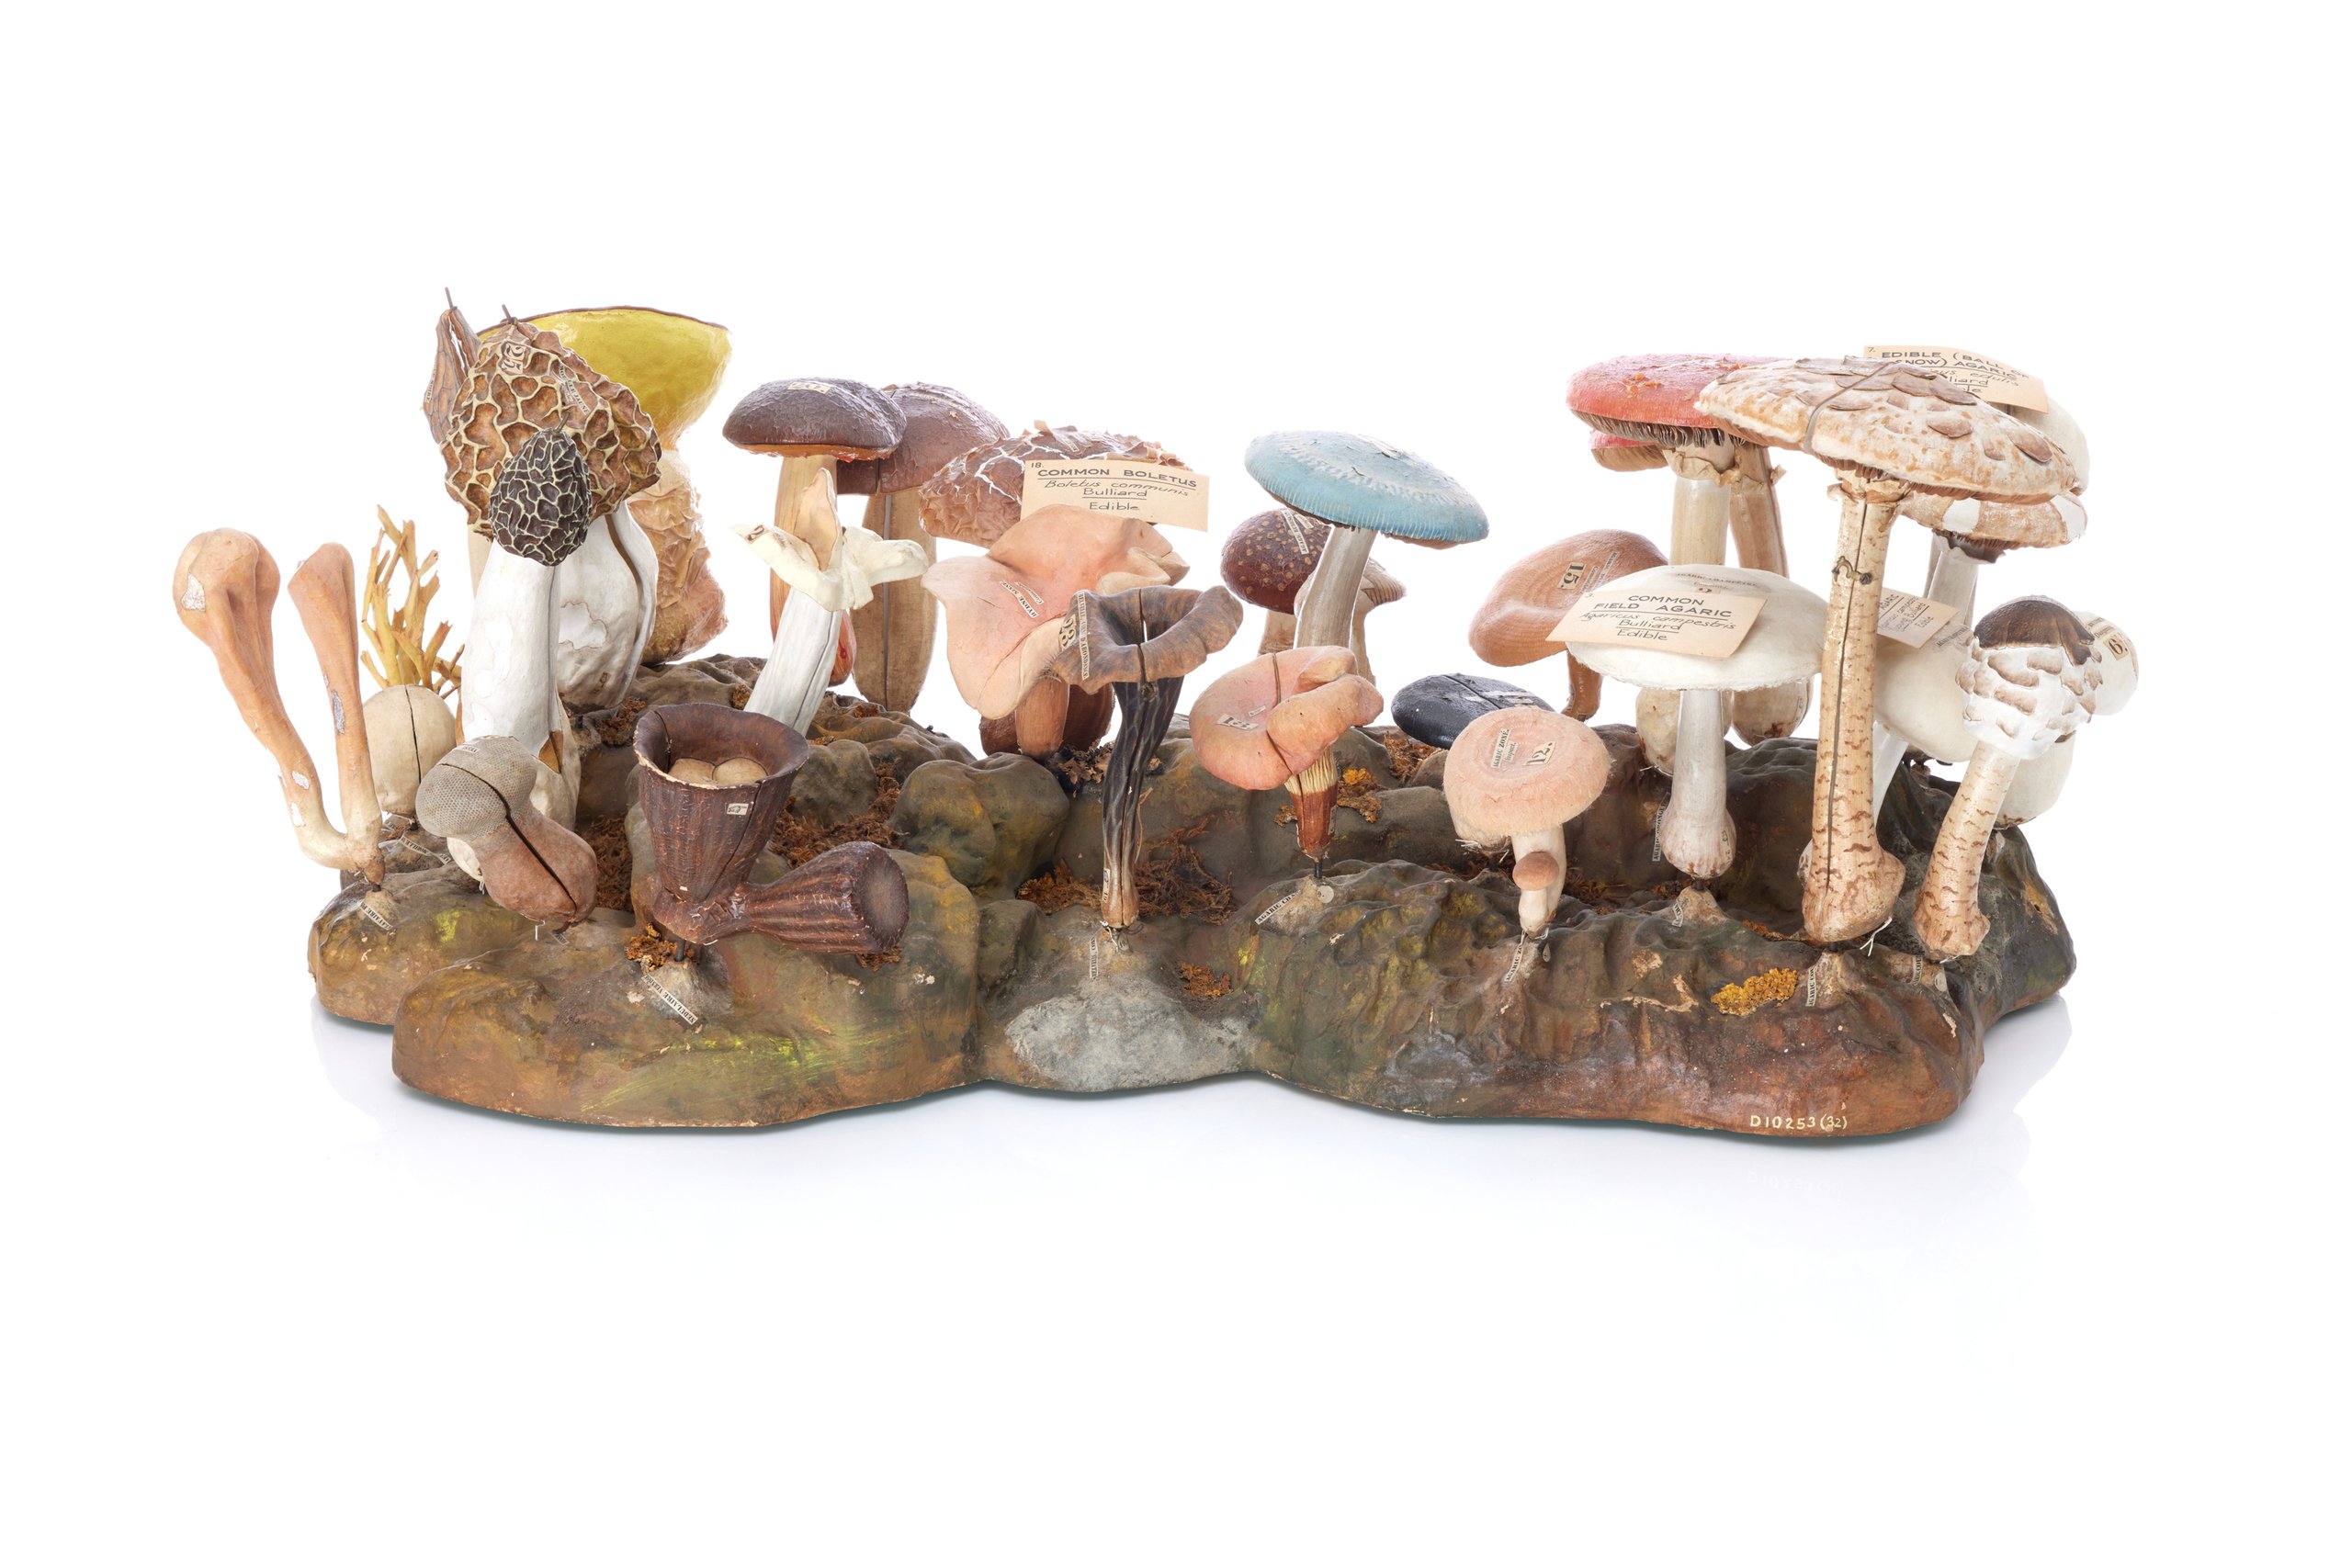 Model showing edible and inedible fungi by Dr Louis Auzoux